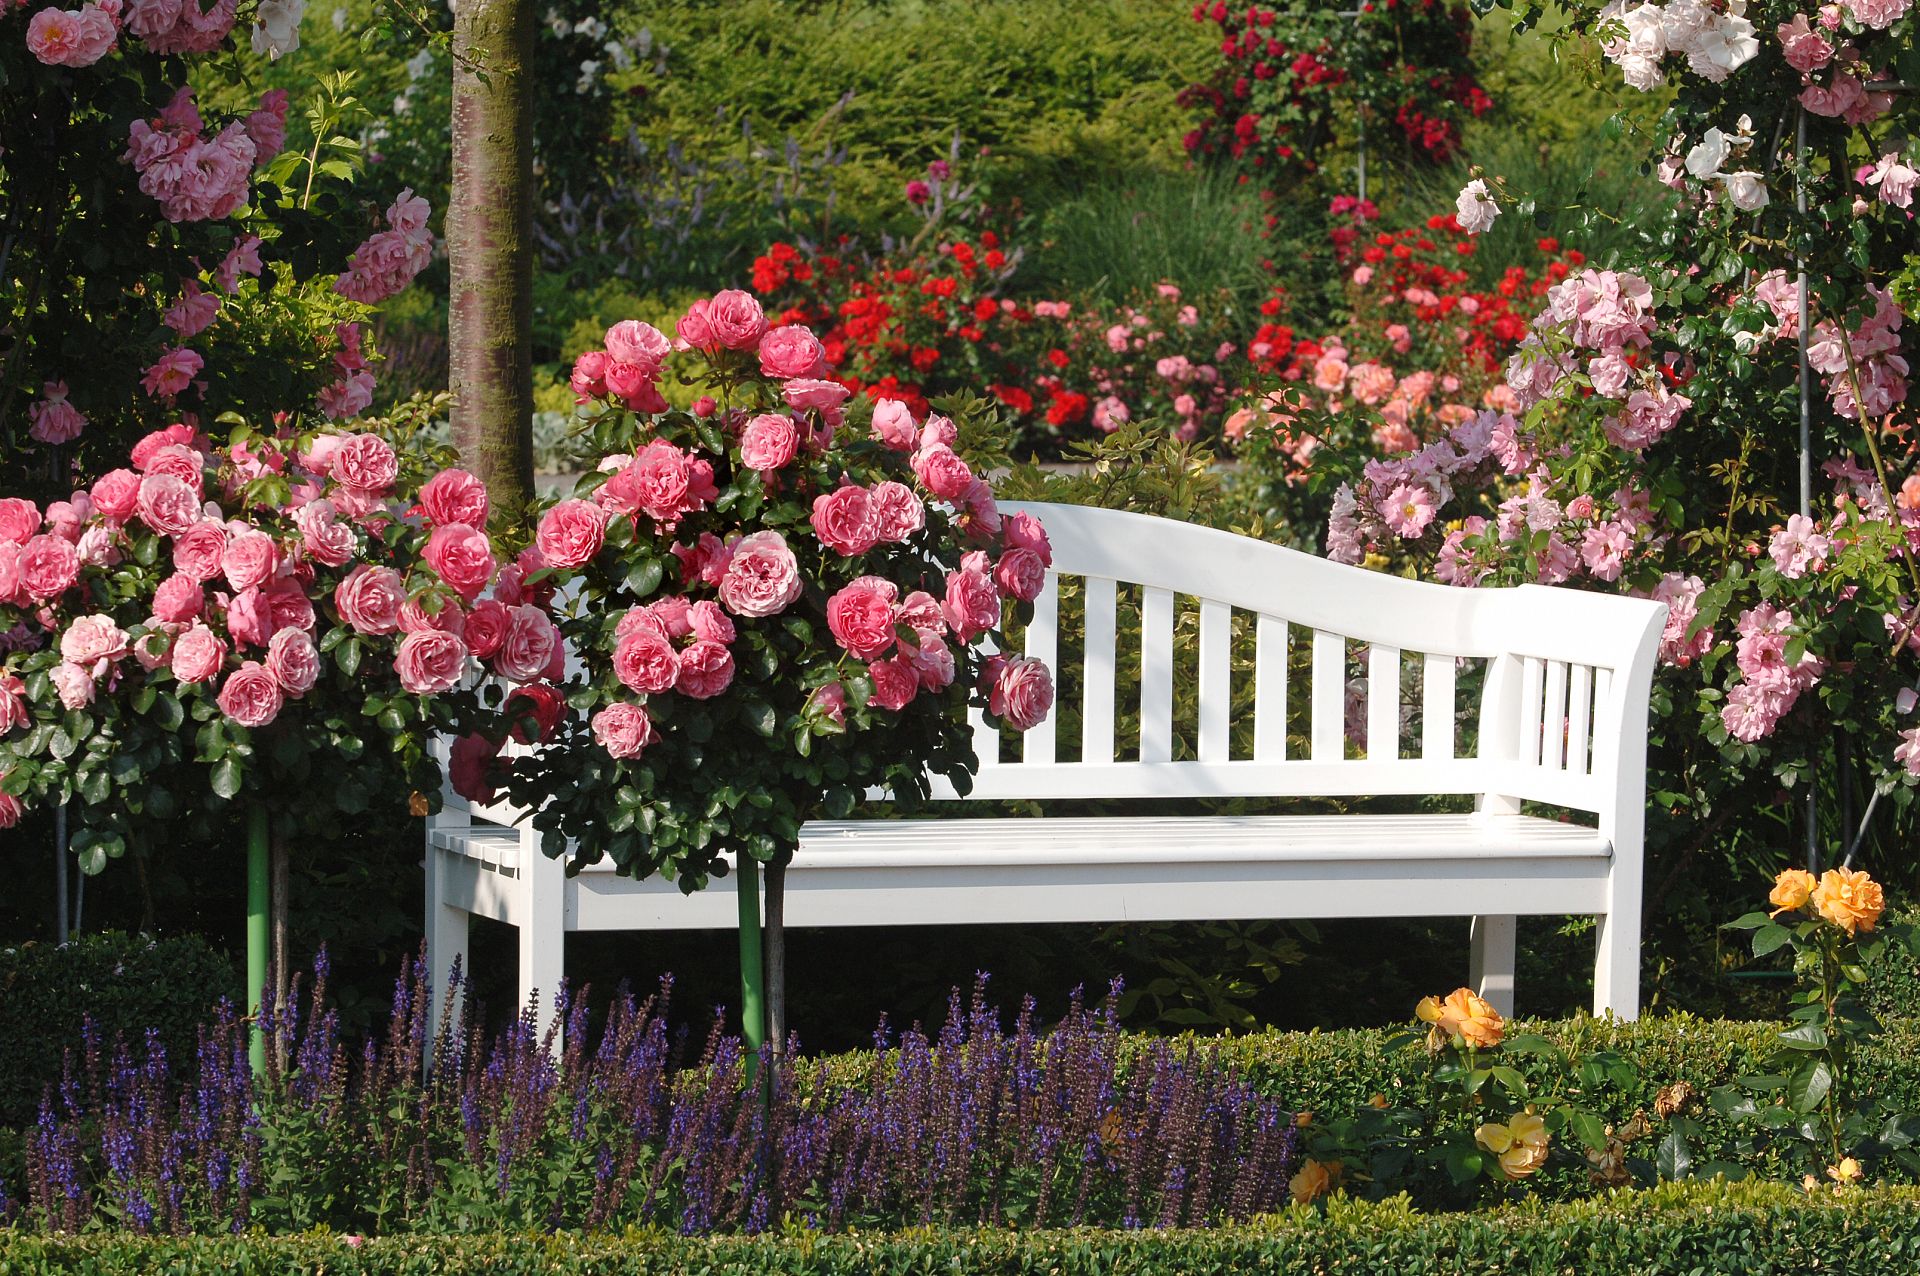 The largest rose collection in the world